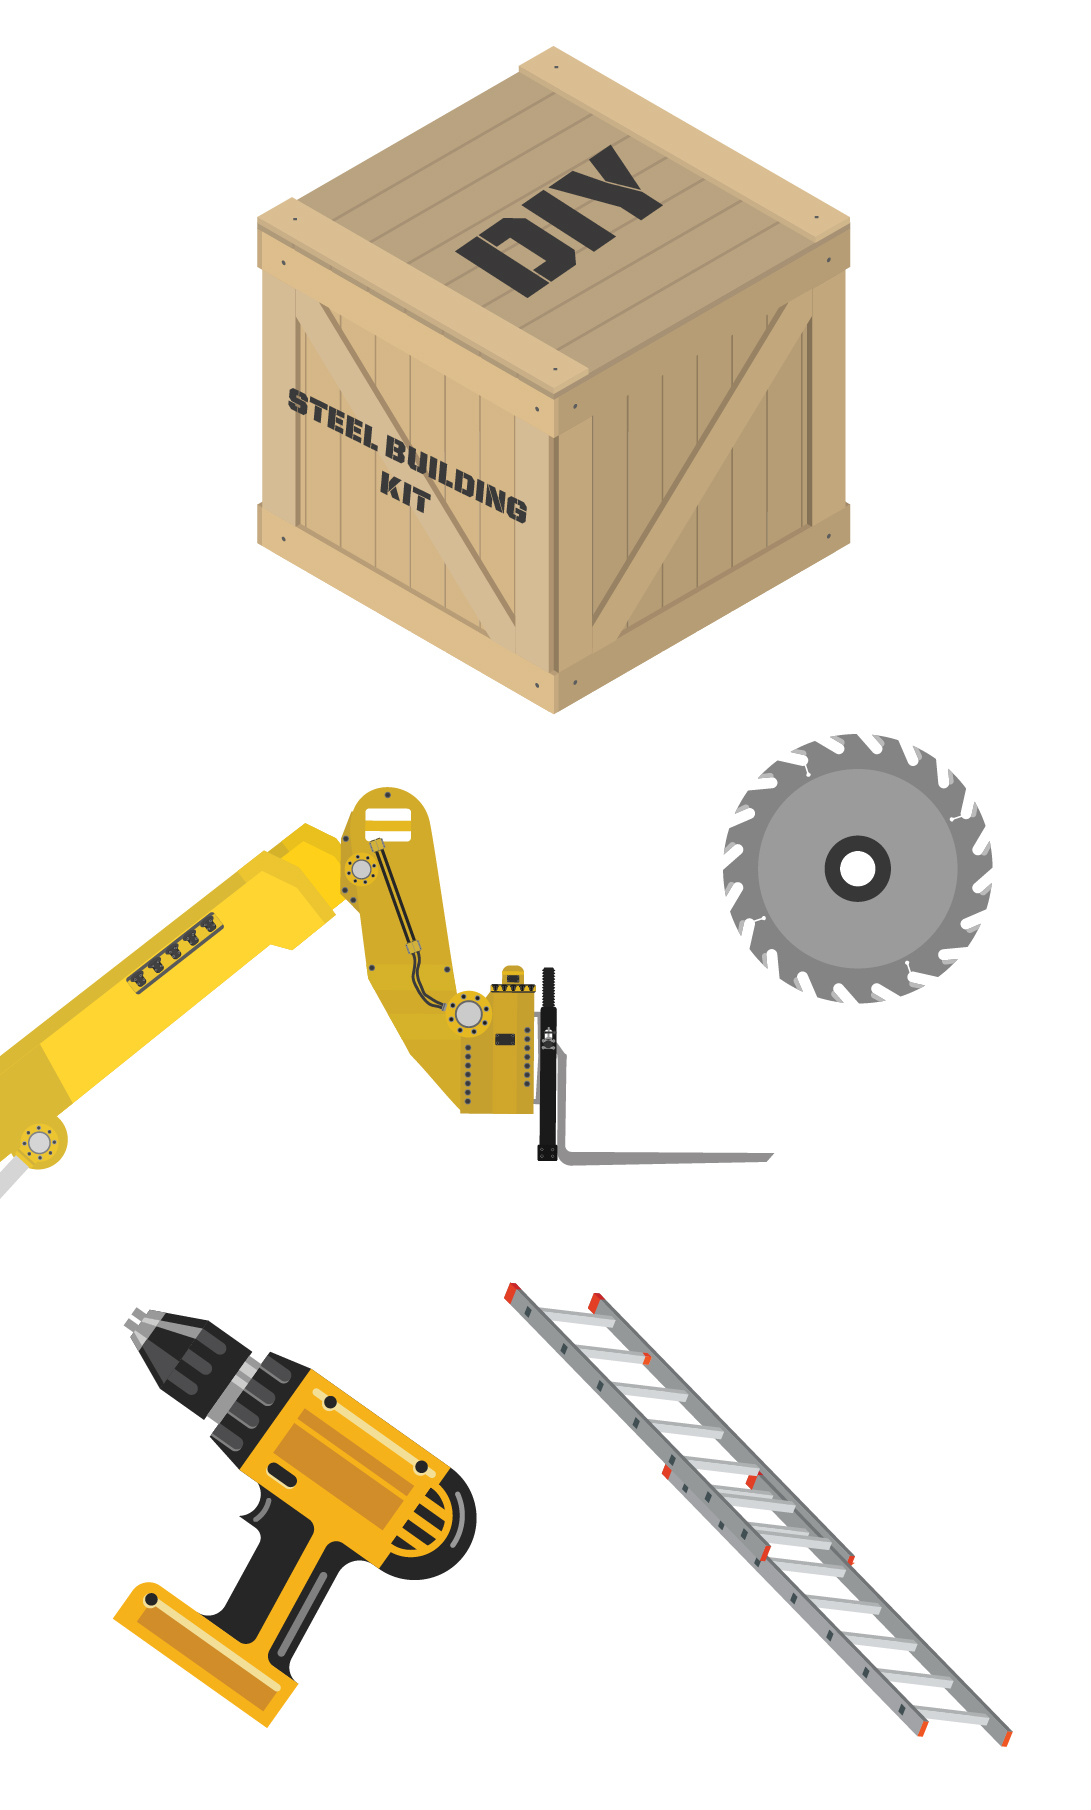 tools needed for steel building kit